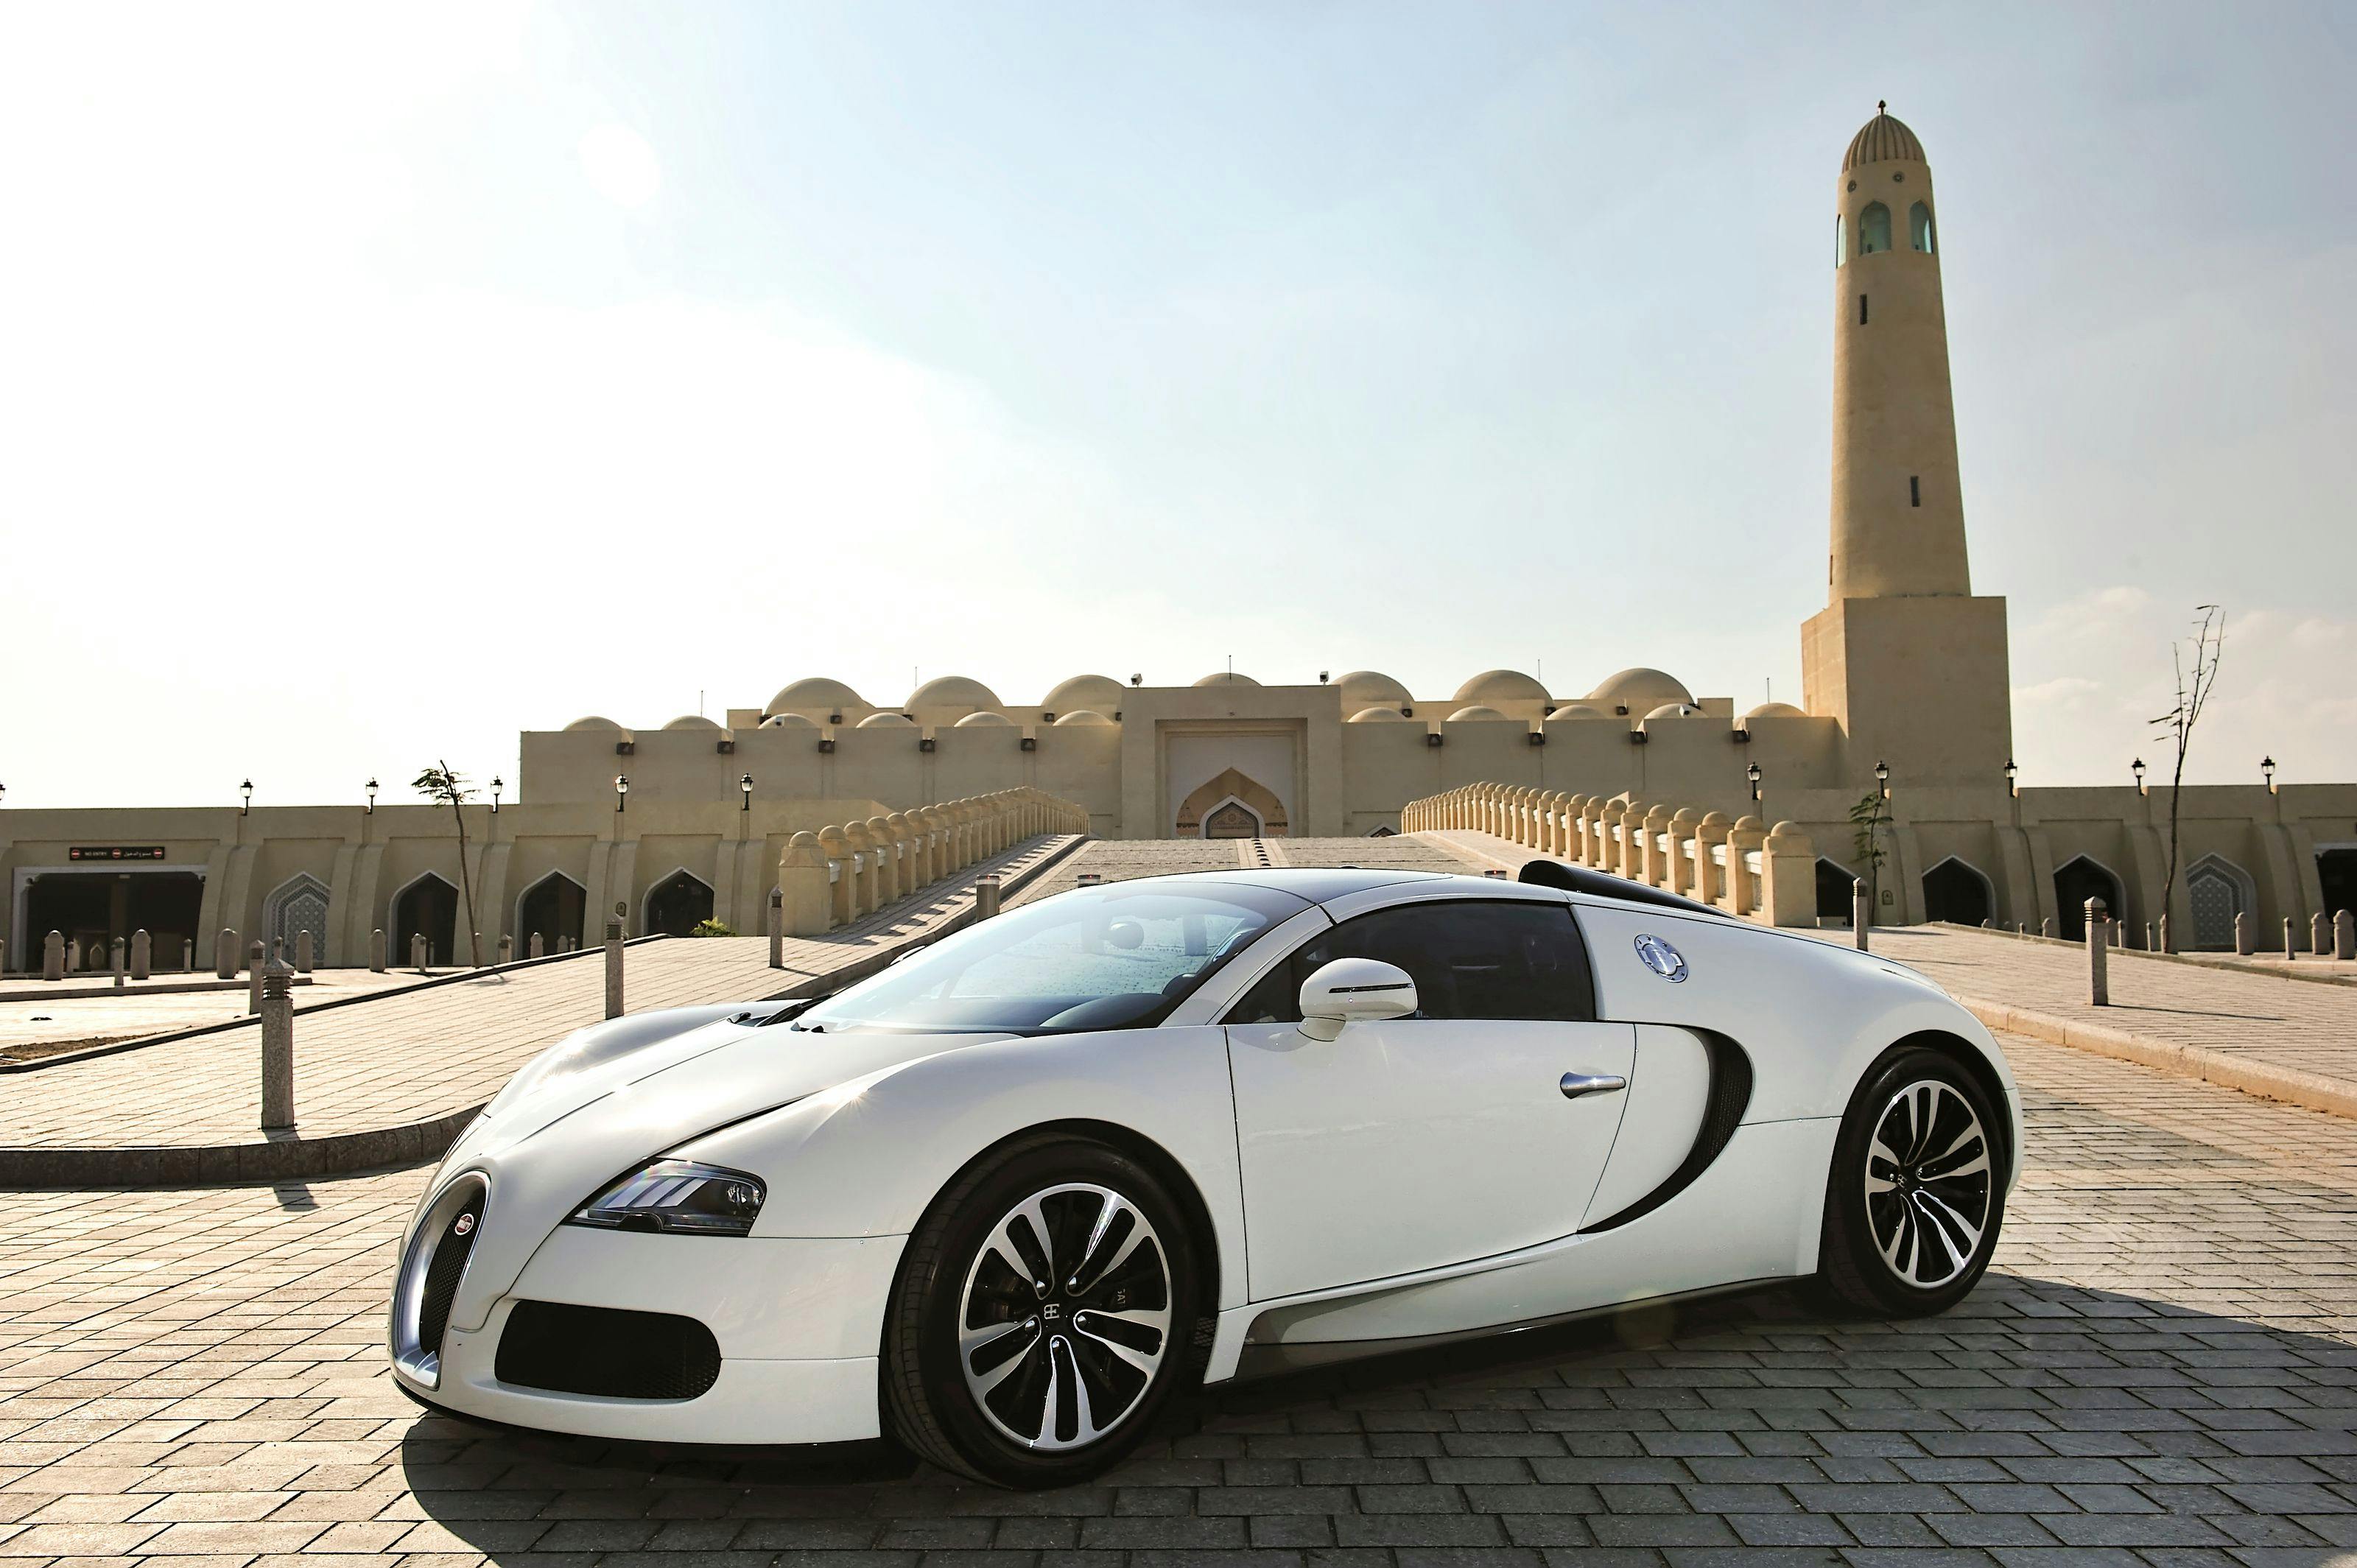 Bugatti takes part in Qatar Motor Show for first time